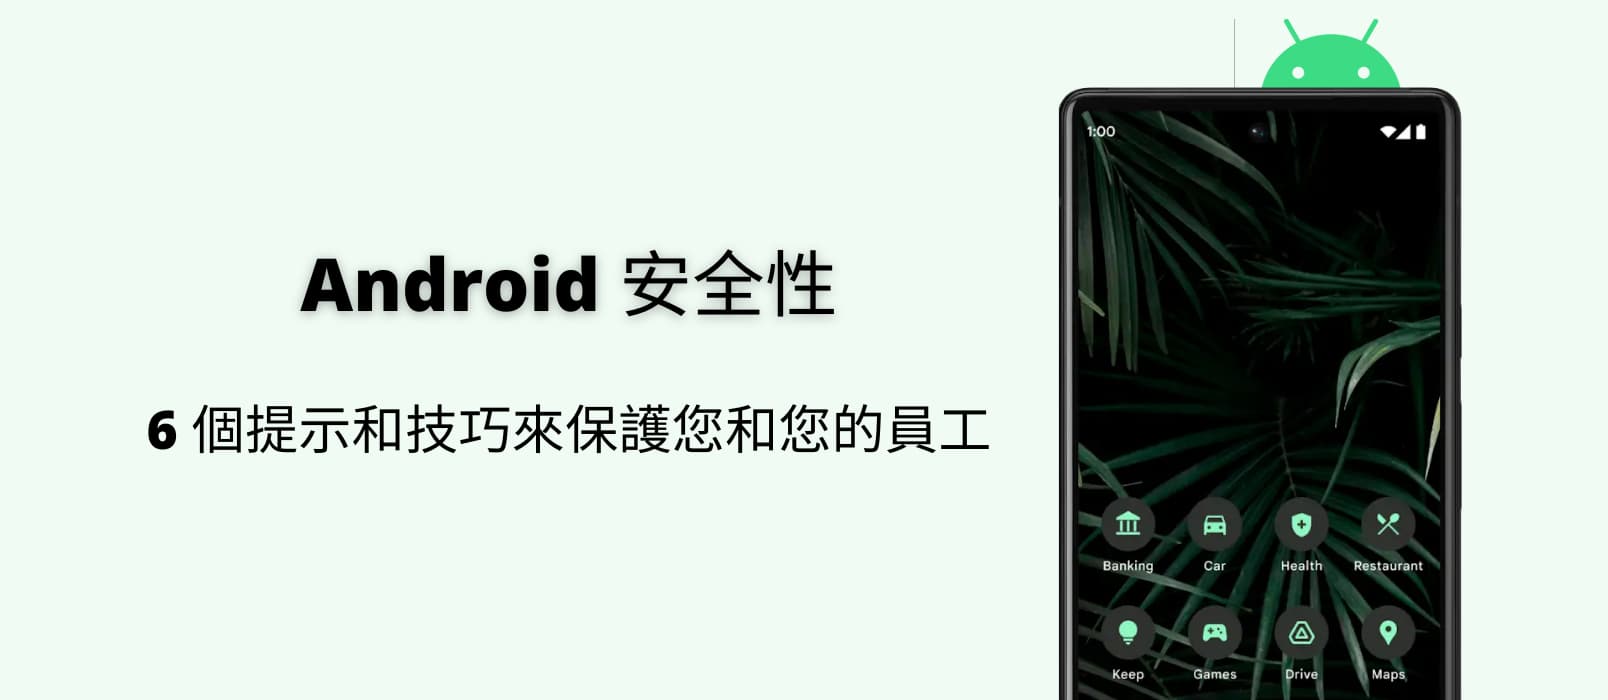 Android 安全性：6 個提示和技巧來保護您和您的員工